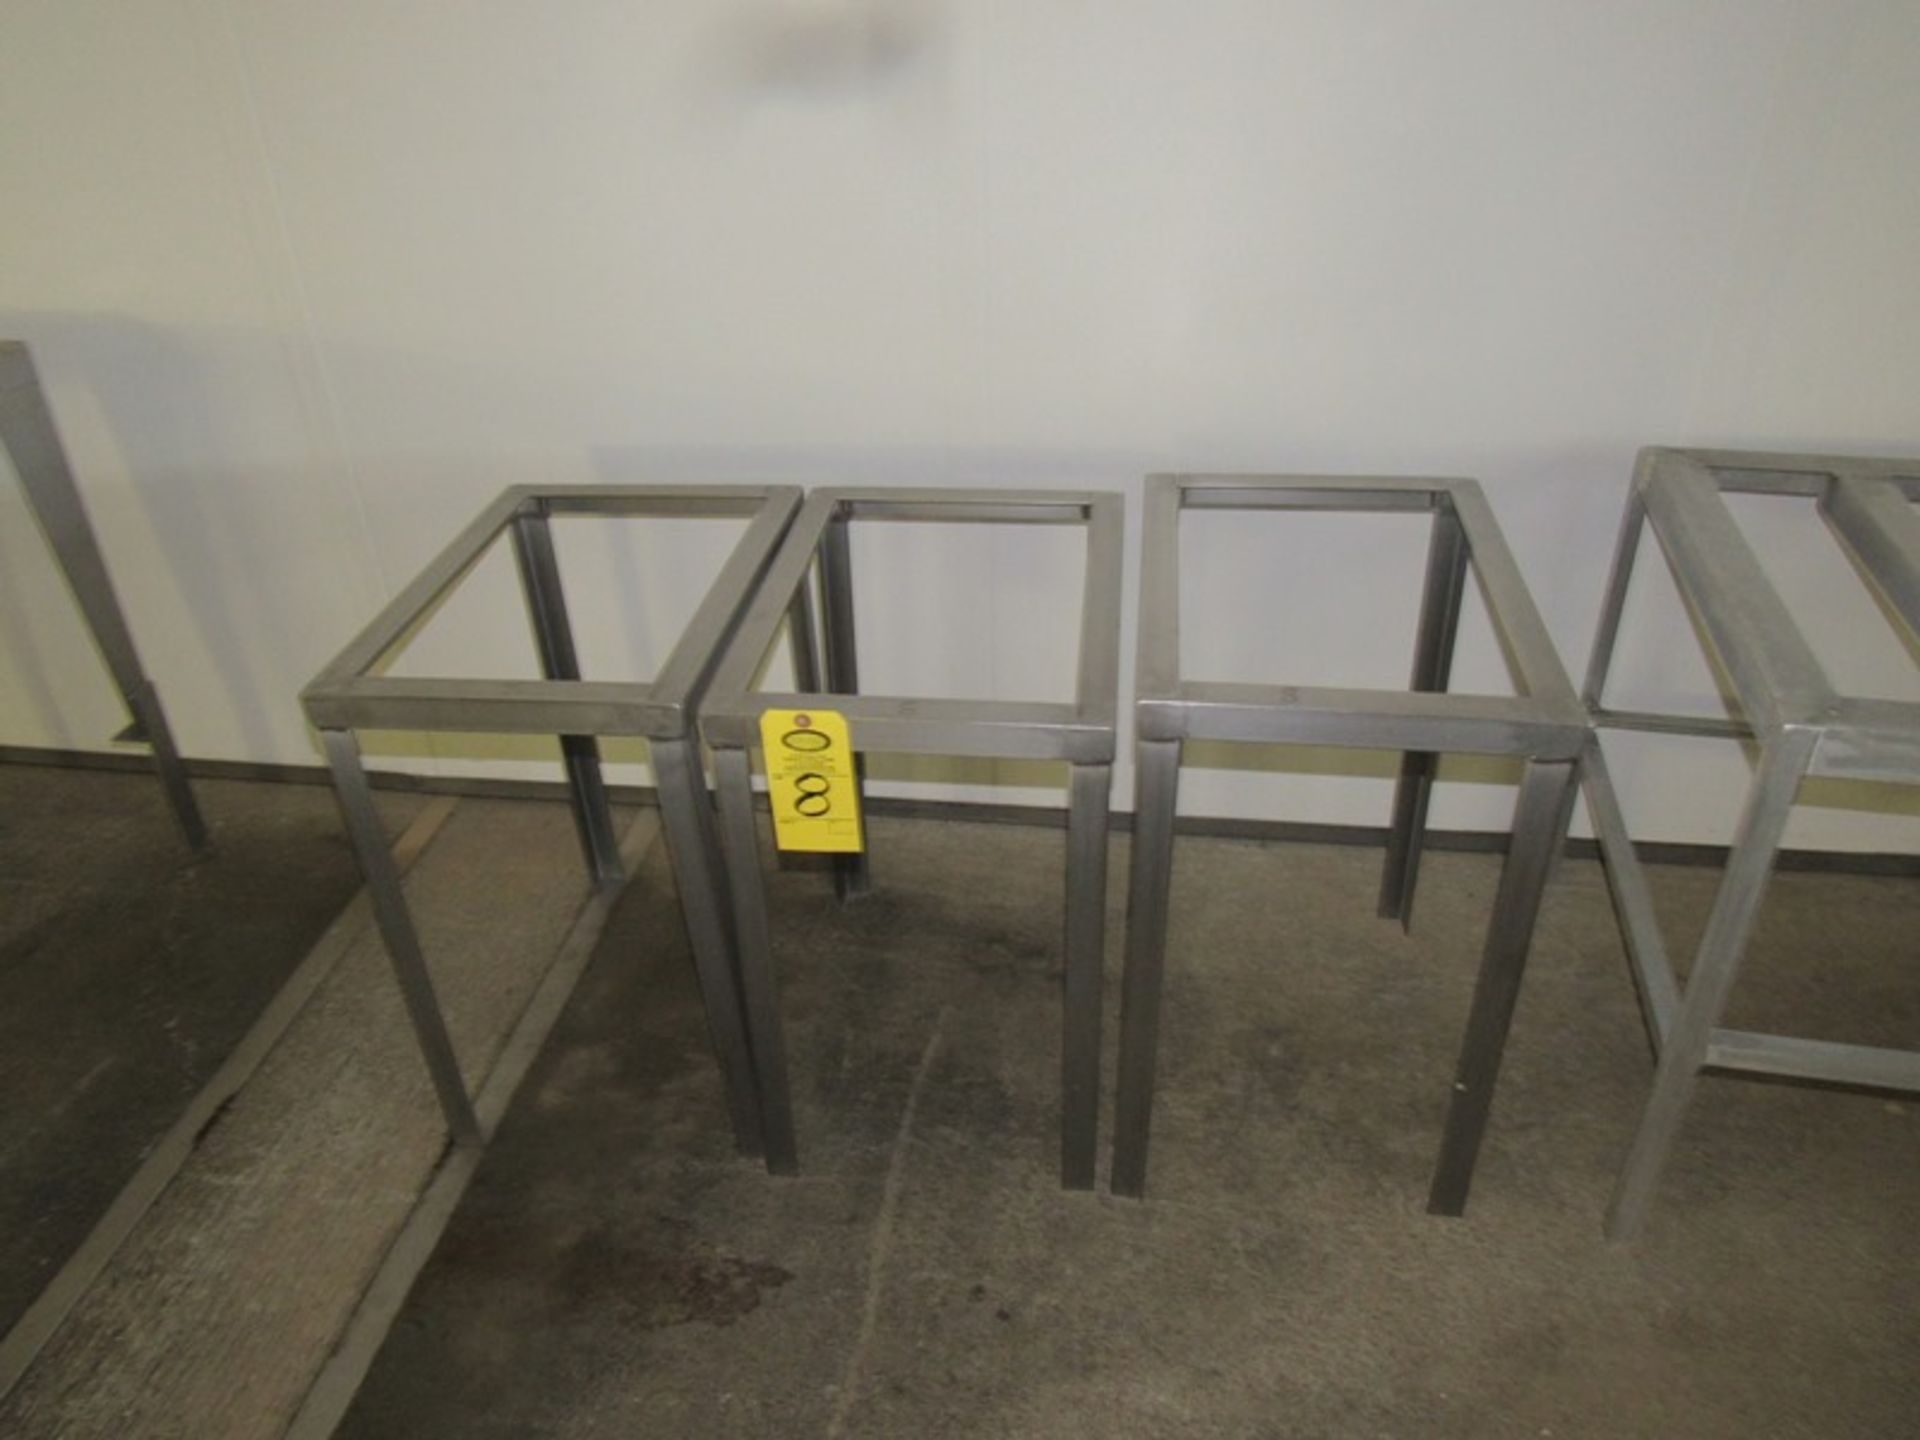 Lot of (3) Stainless Steel Tote Racks, 15" W X 20" L X 25" T (Required Rigging Fee: $50.00-Payment